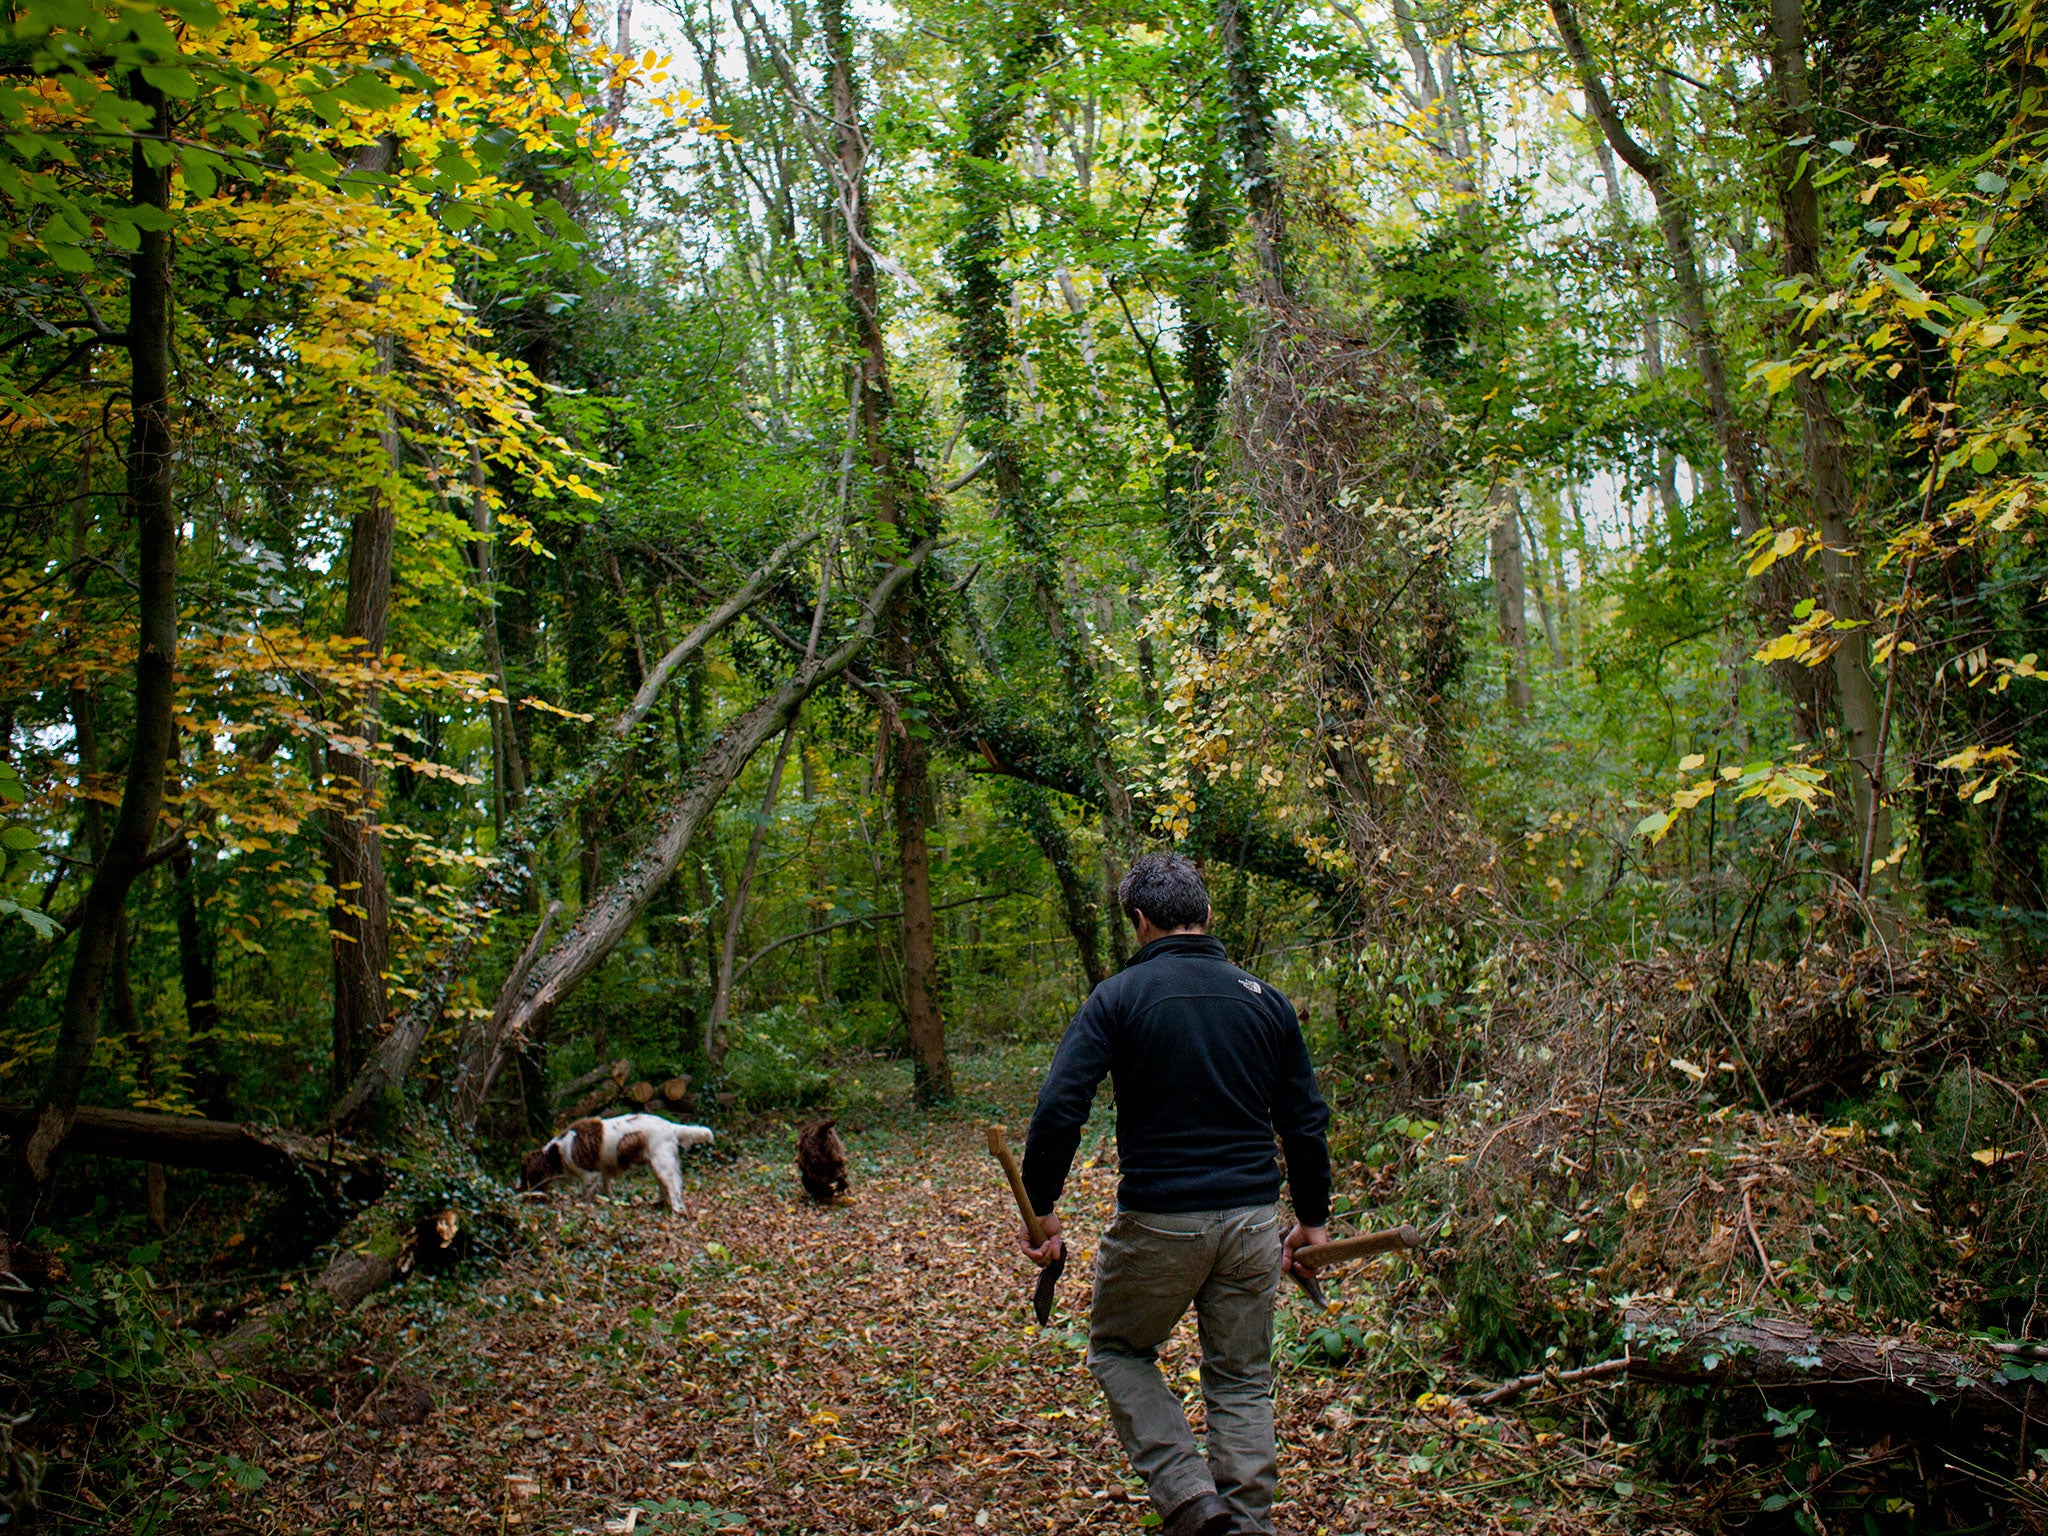 Rob’s woodland in the Black Mountains, South Wales features a mix of young oak, alder, beech, birch, hazel, lime, hawthorn, wych elm, the odd sweet chestnut and a lot of ash